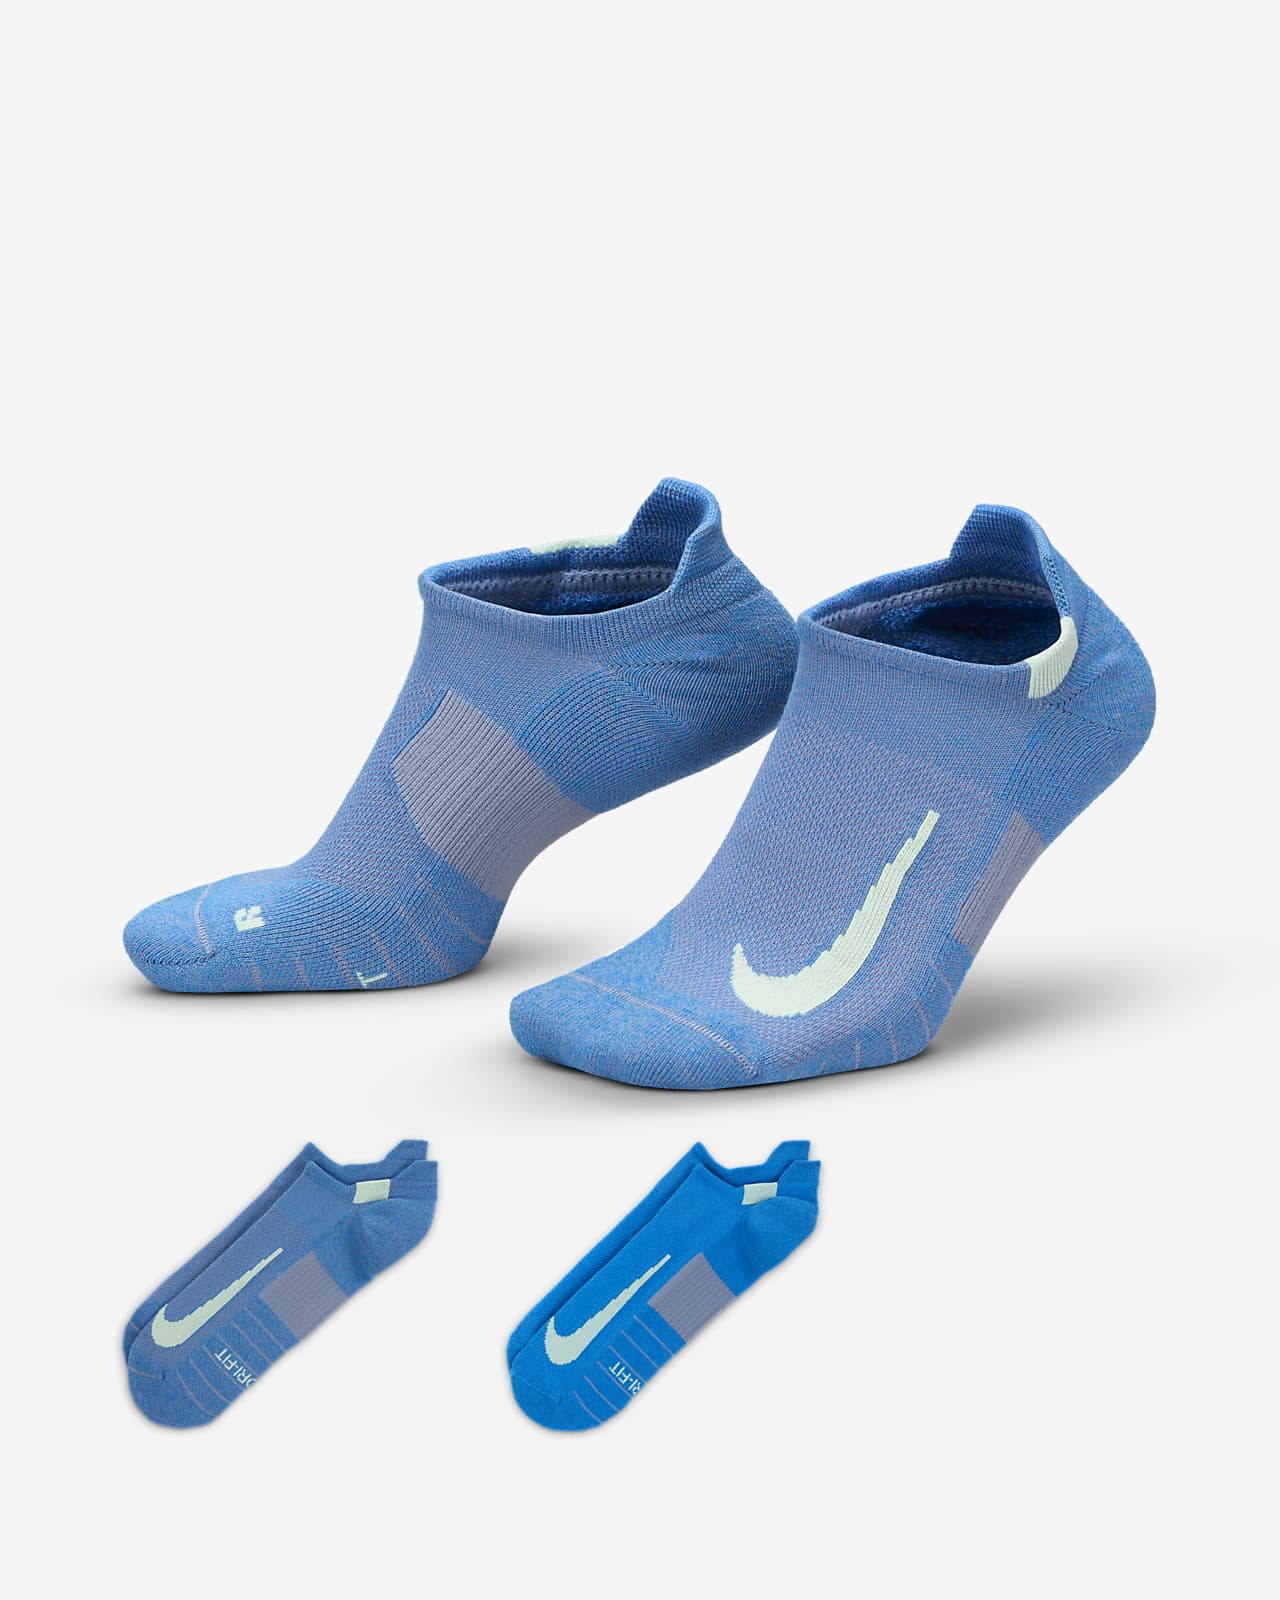 Calcetines invisibles de running (2 pares) Nike Multiplier